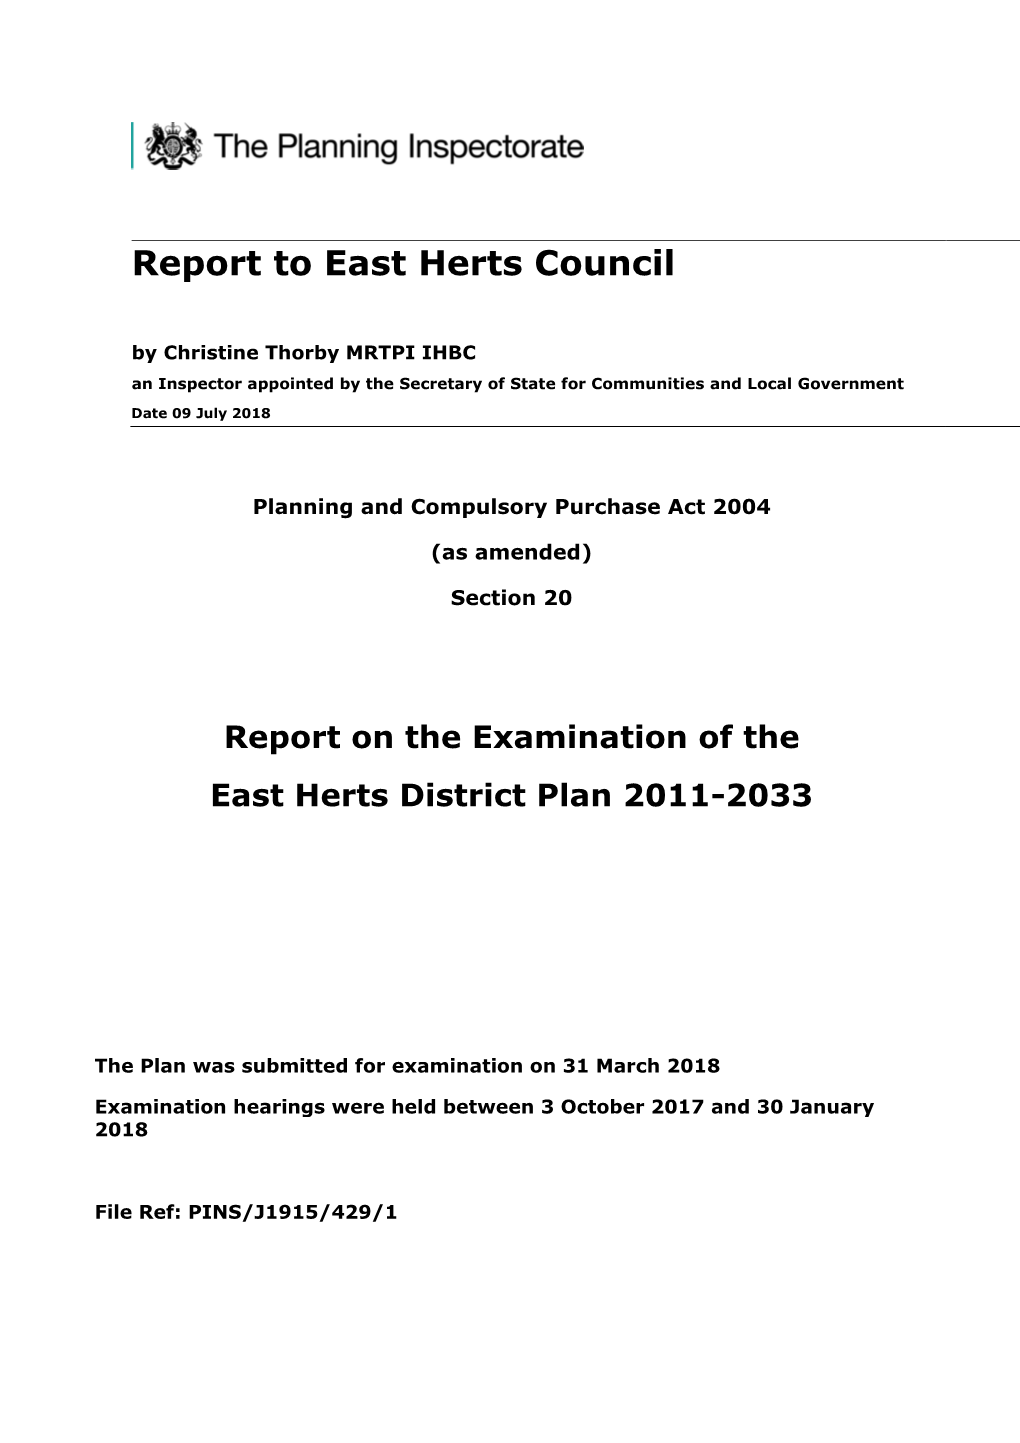 Report to East Herts Council